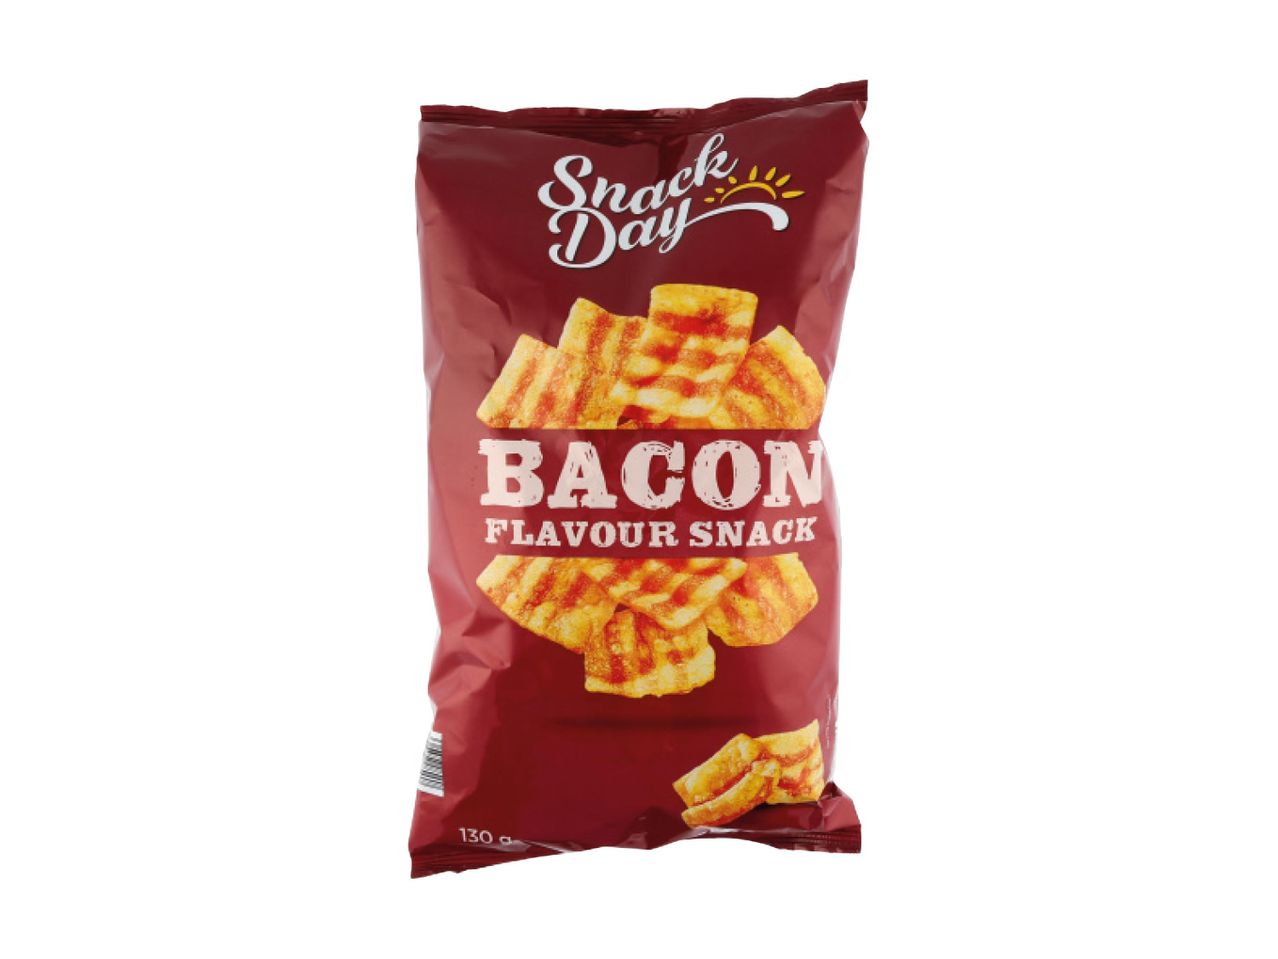 Go to full screen view: Bacon Snacks - Image 1